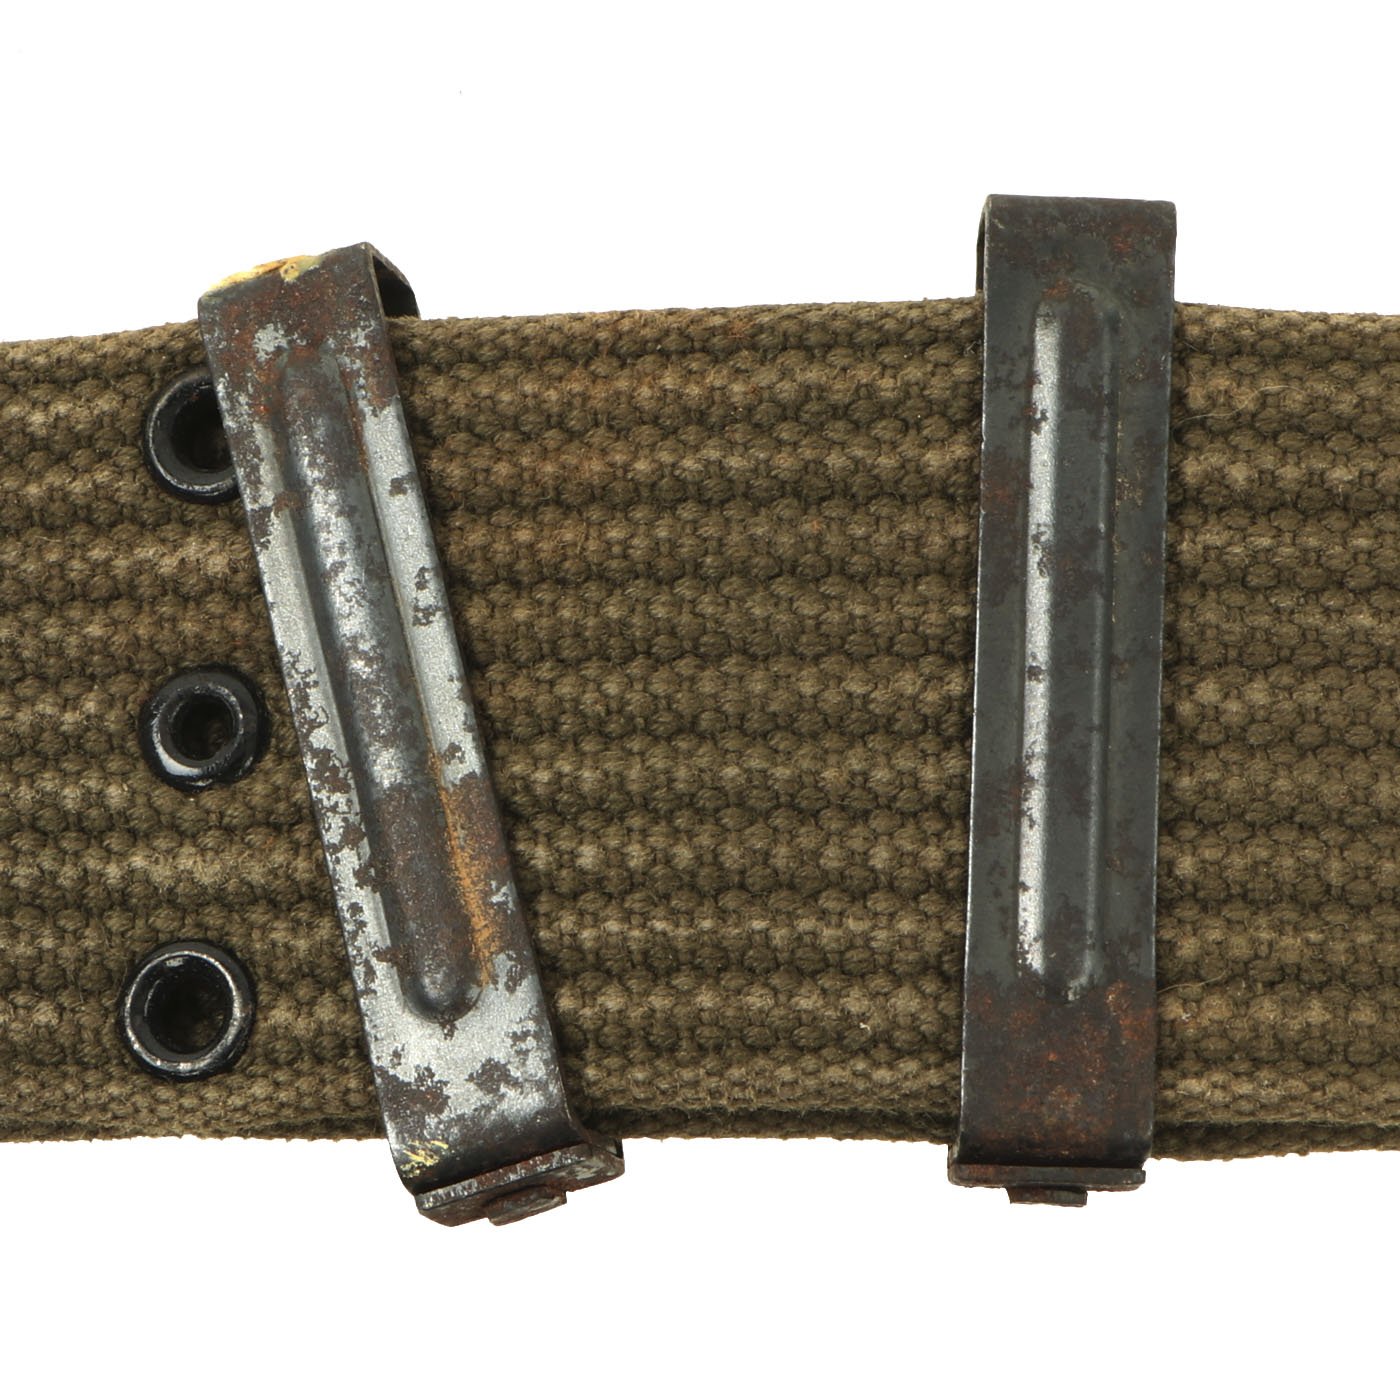 North Vietnamese Army Viet Cong Officer's Early Canvas Belt with Brass Star  Buckle